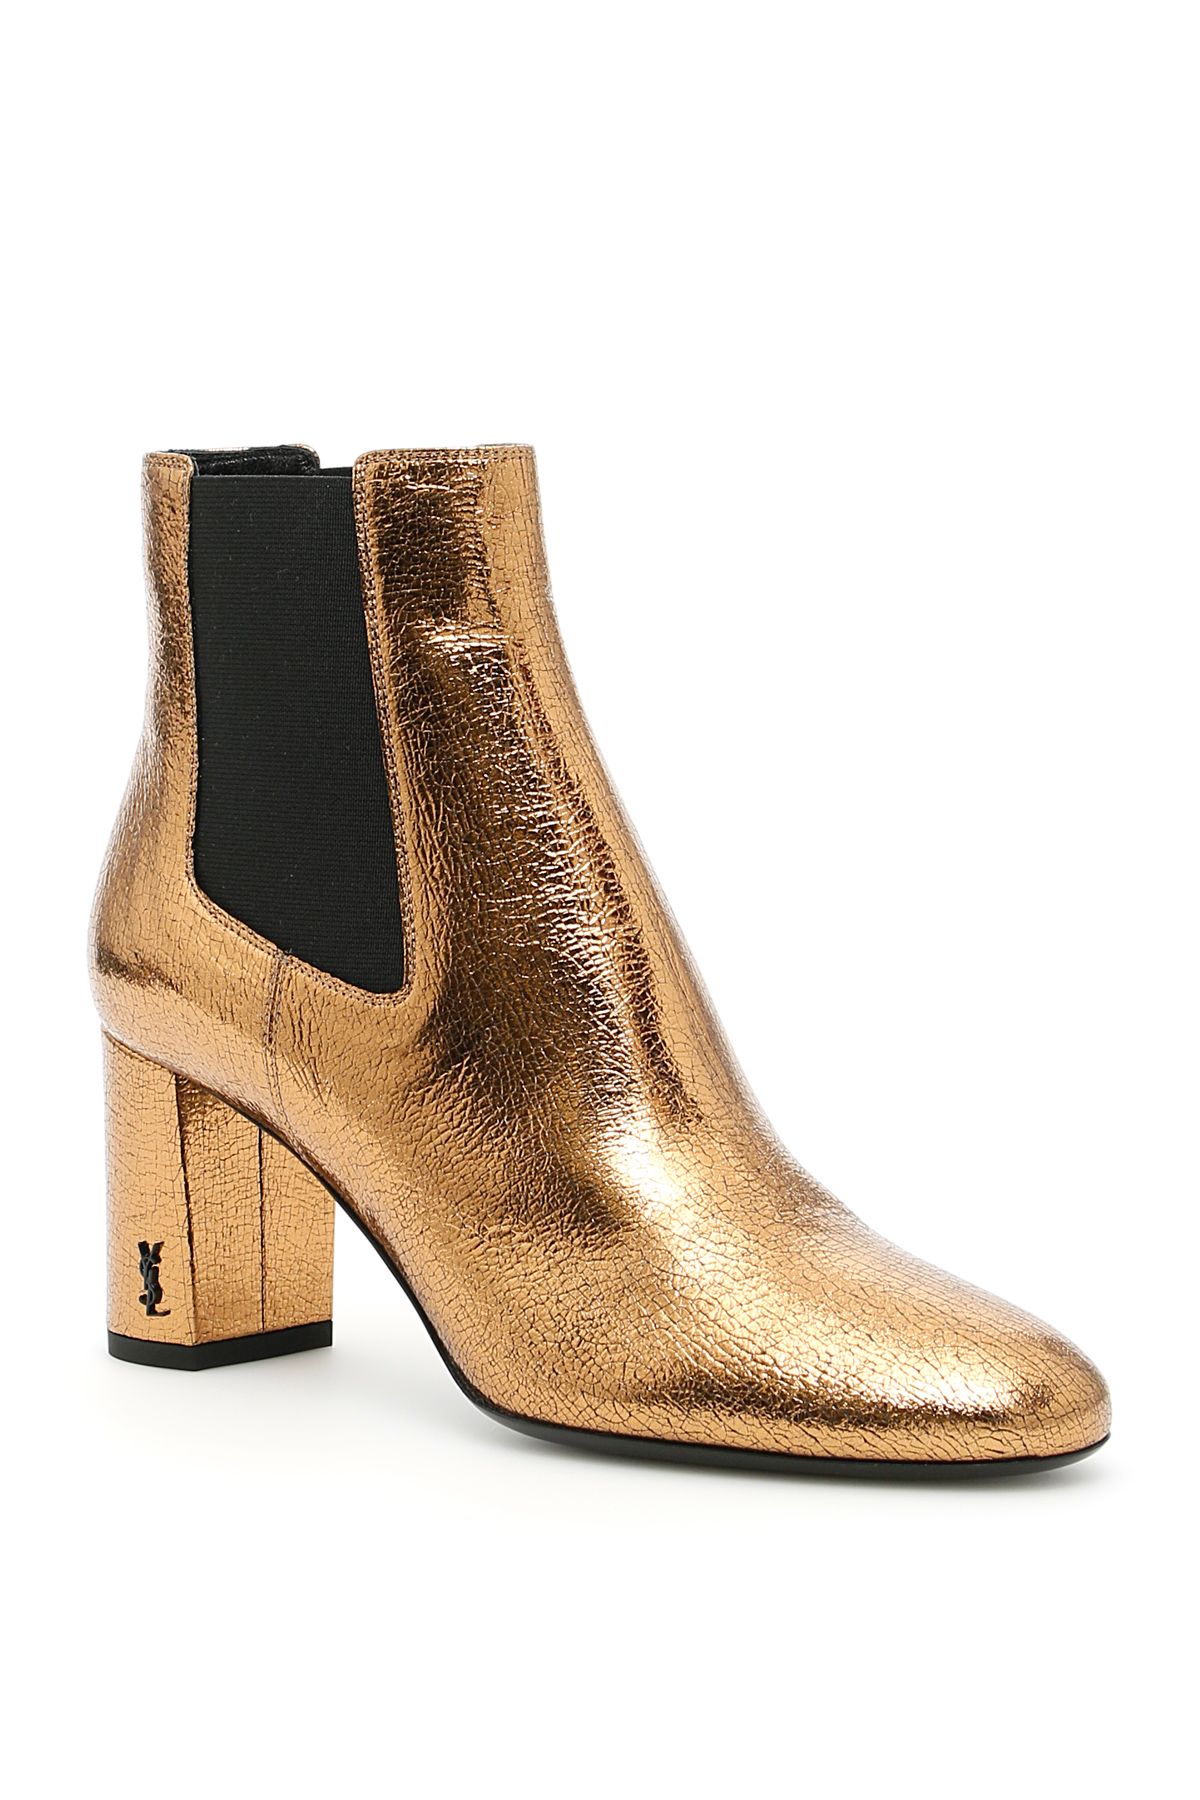 SAINT LAURENT Cracked Metallic Leather Loulou Pin Boots in Bronze ...